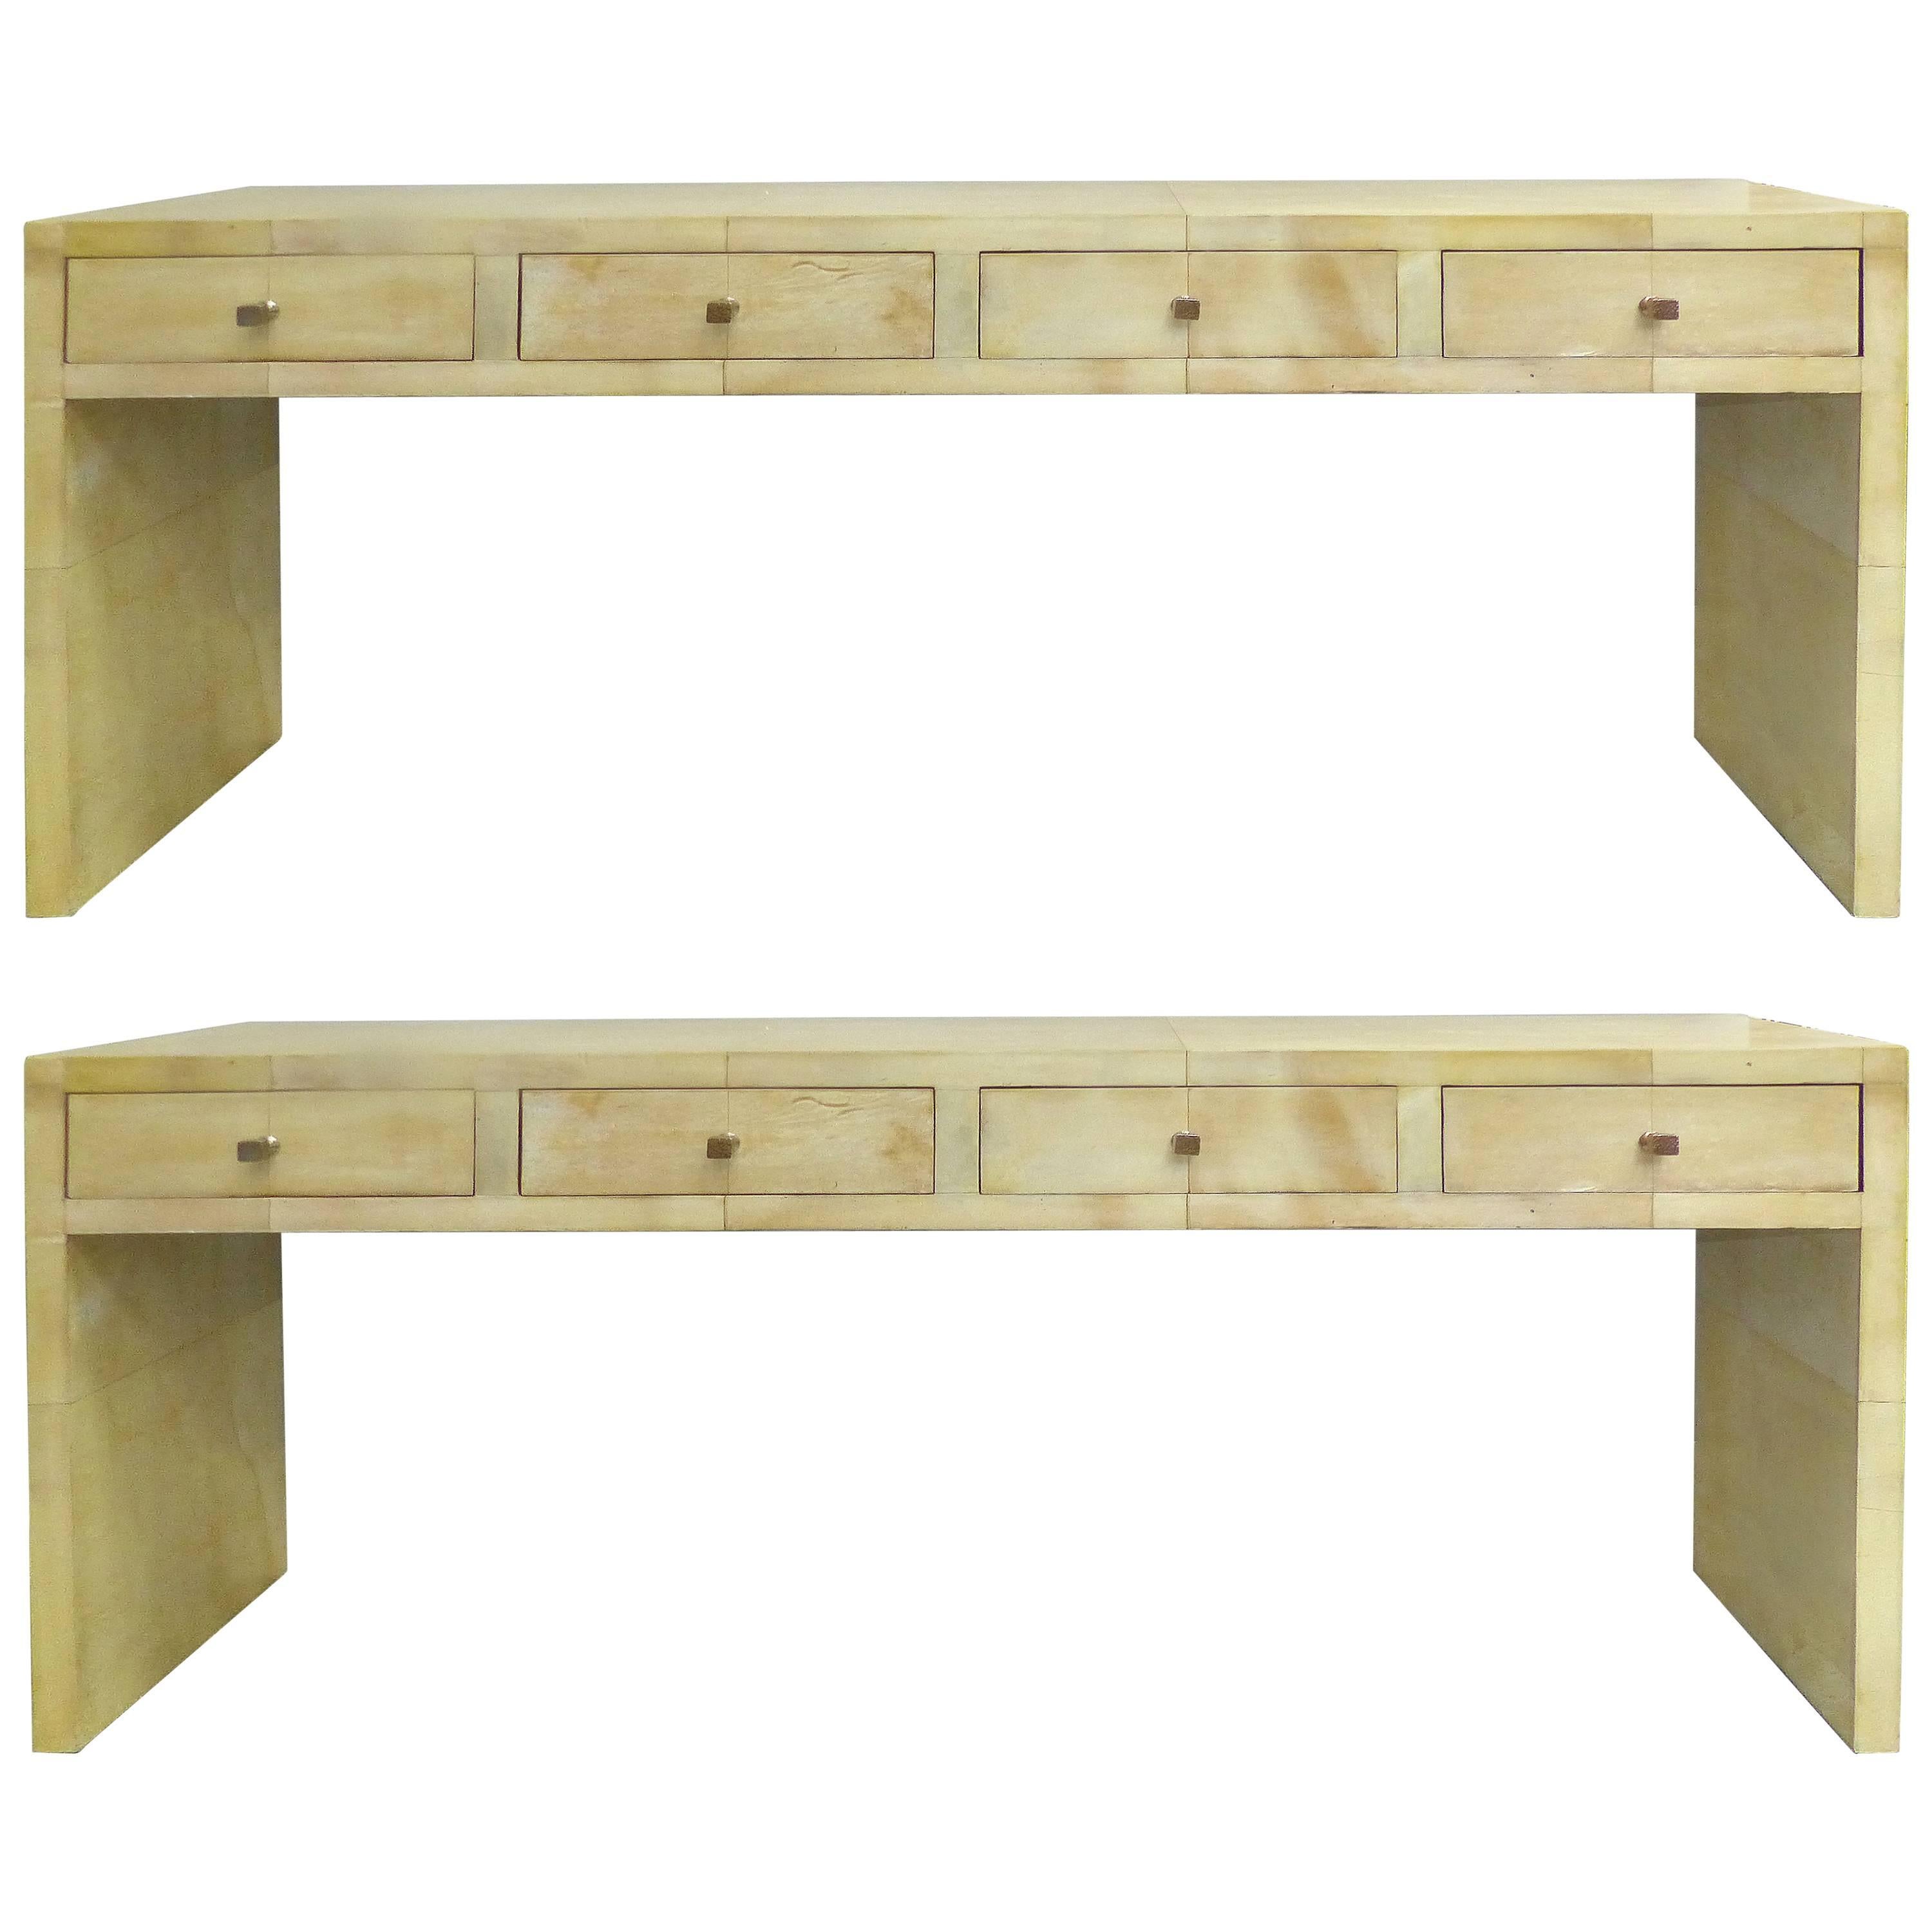 Goatskin Clad Wood Four-Drawer Console Tables with Hammered Copper Handles